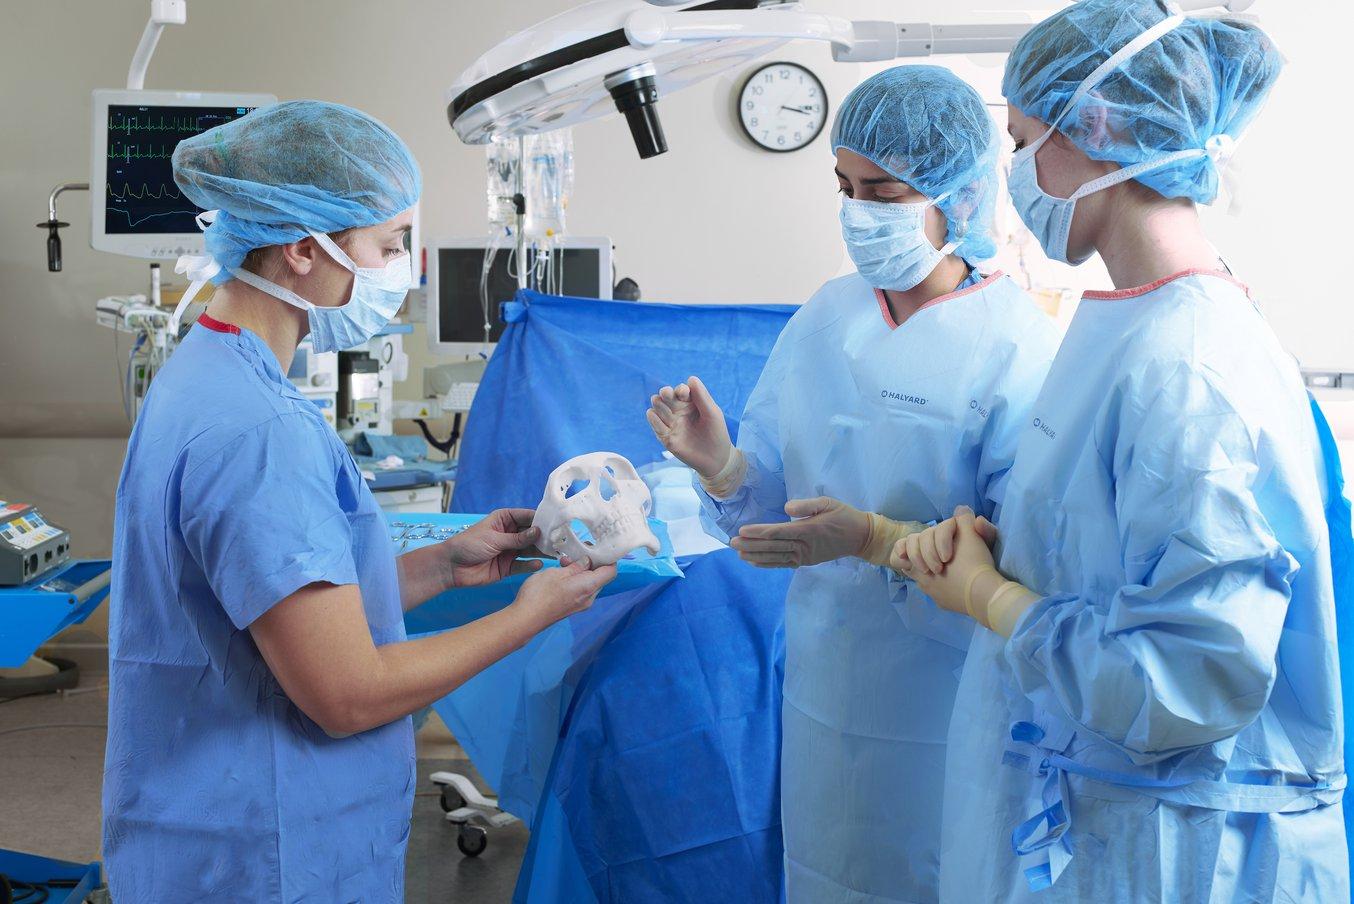 Three medical professions in PPE stand in an operating room holding an anatomical model